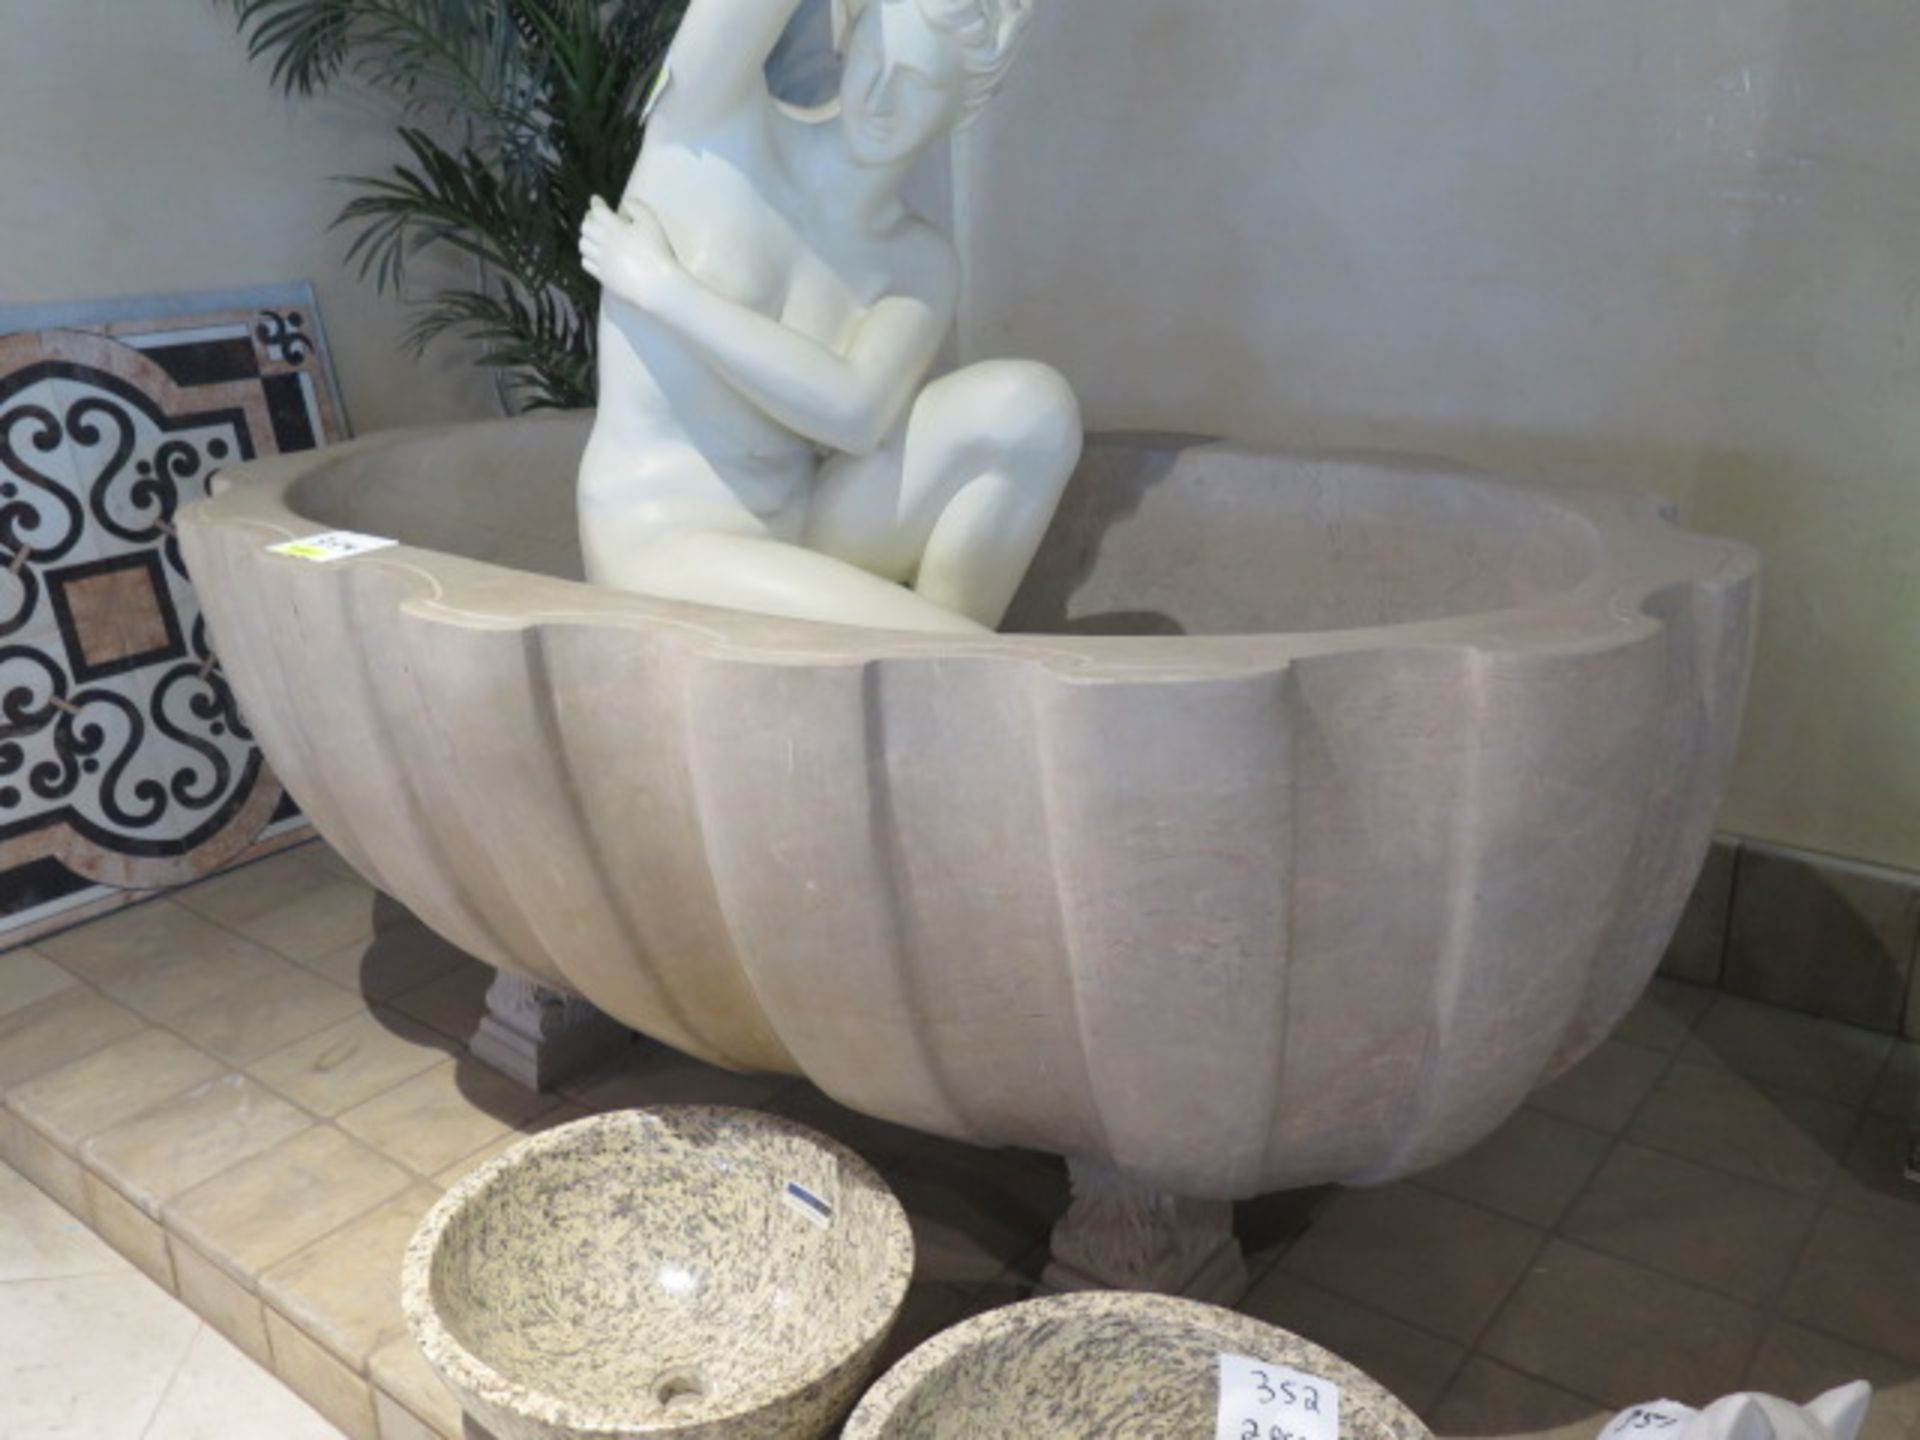 Marble Bath Tub (SOLD AS-IS - NO WARRANTY) - Image 2 of 8